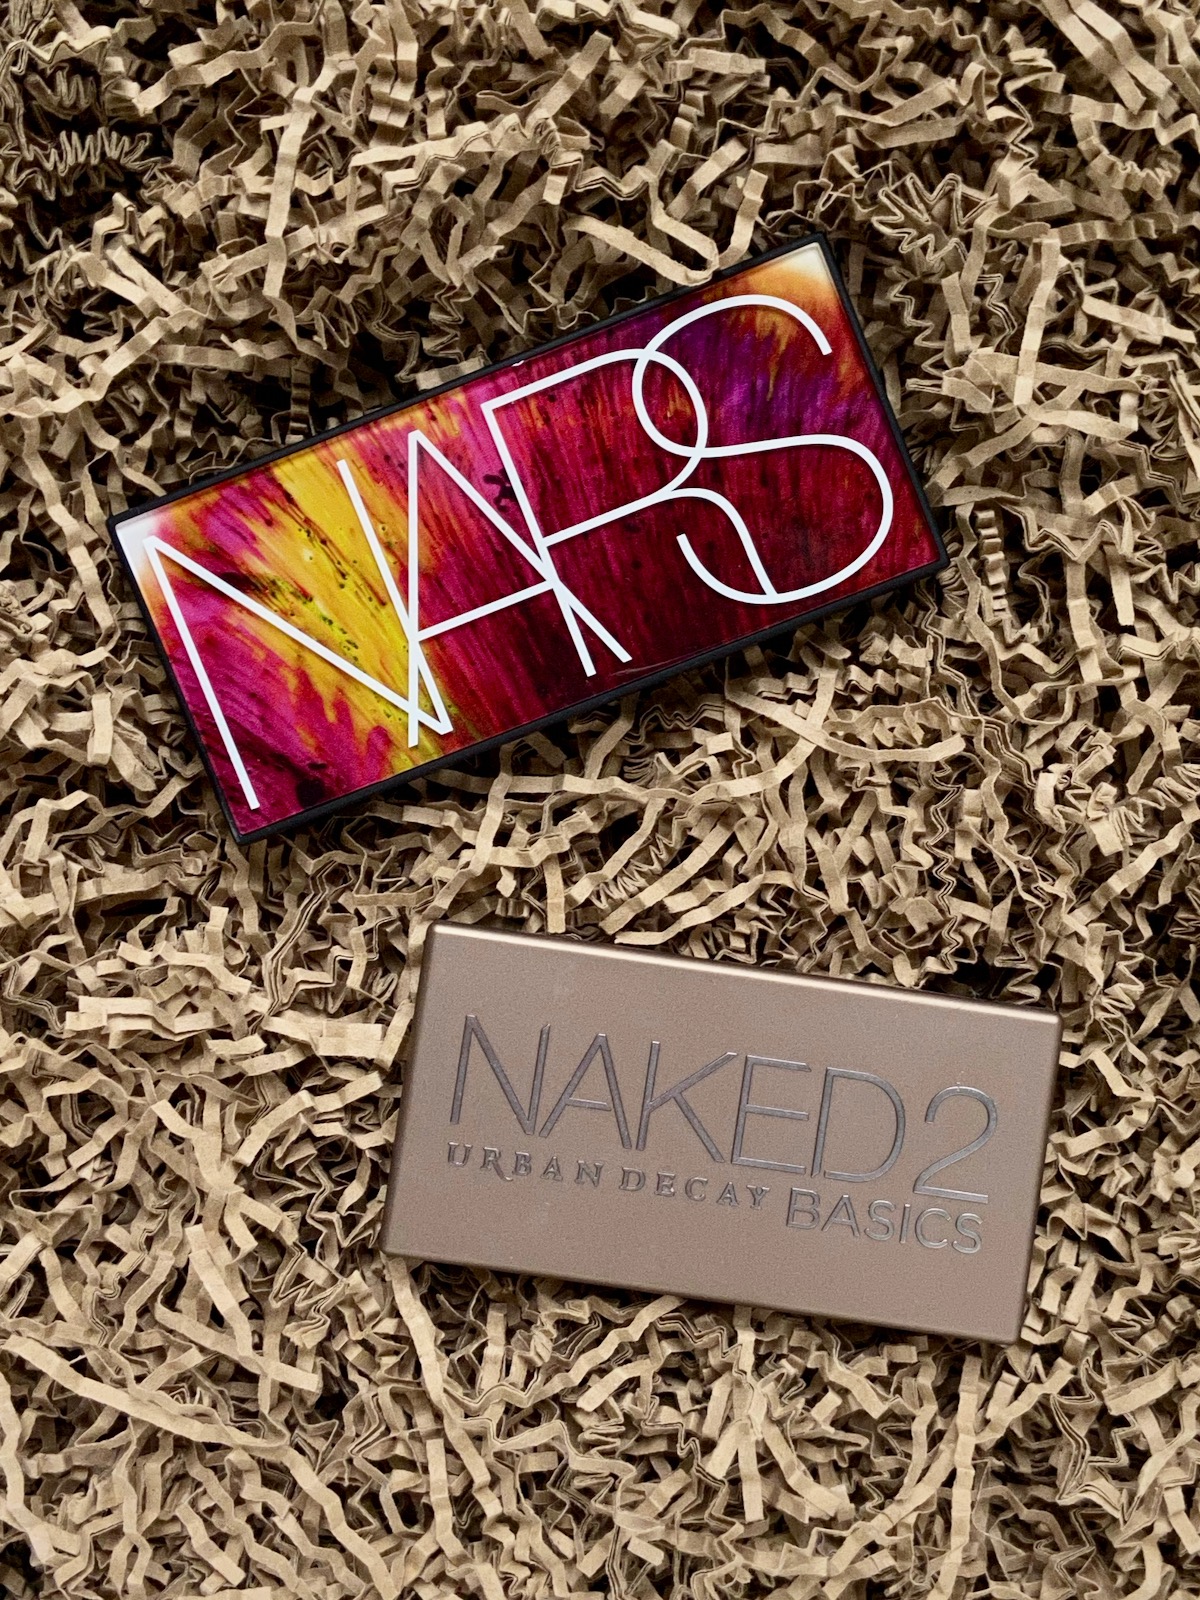 Urban Decay Naked2 Basics NARS LOST IN LUSTER FACE PALETTE